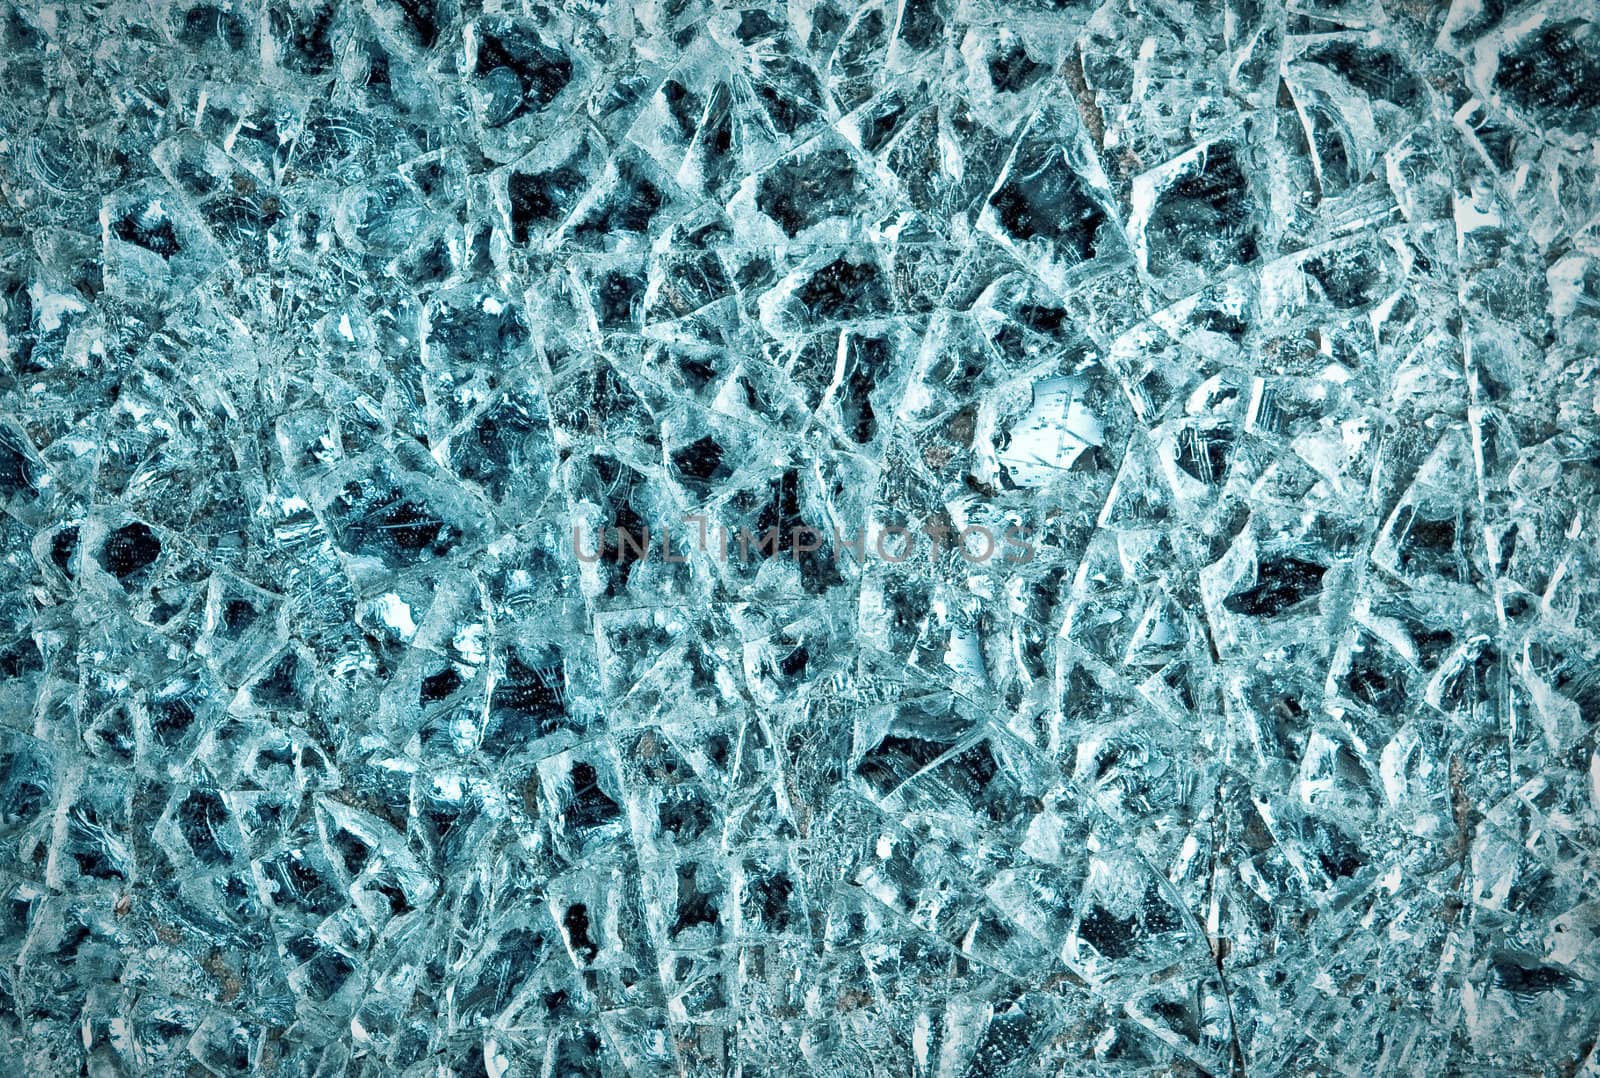 A dramatic shattered glass background in cold tones